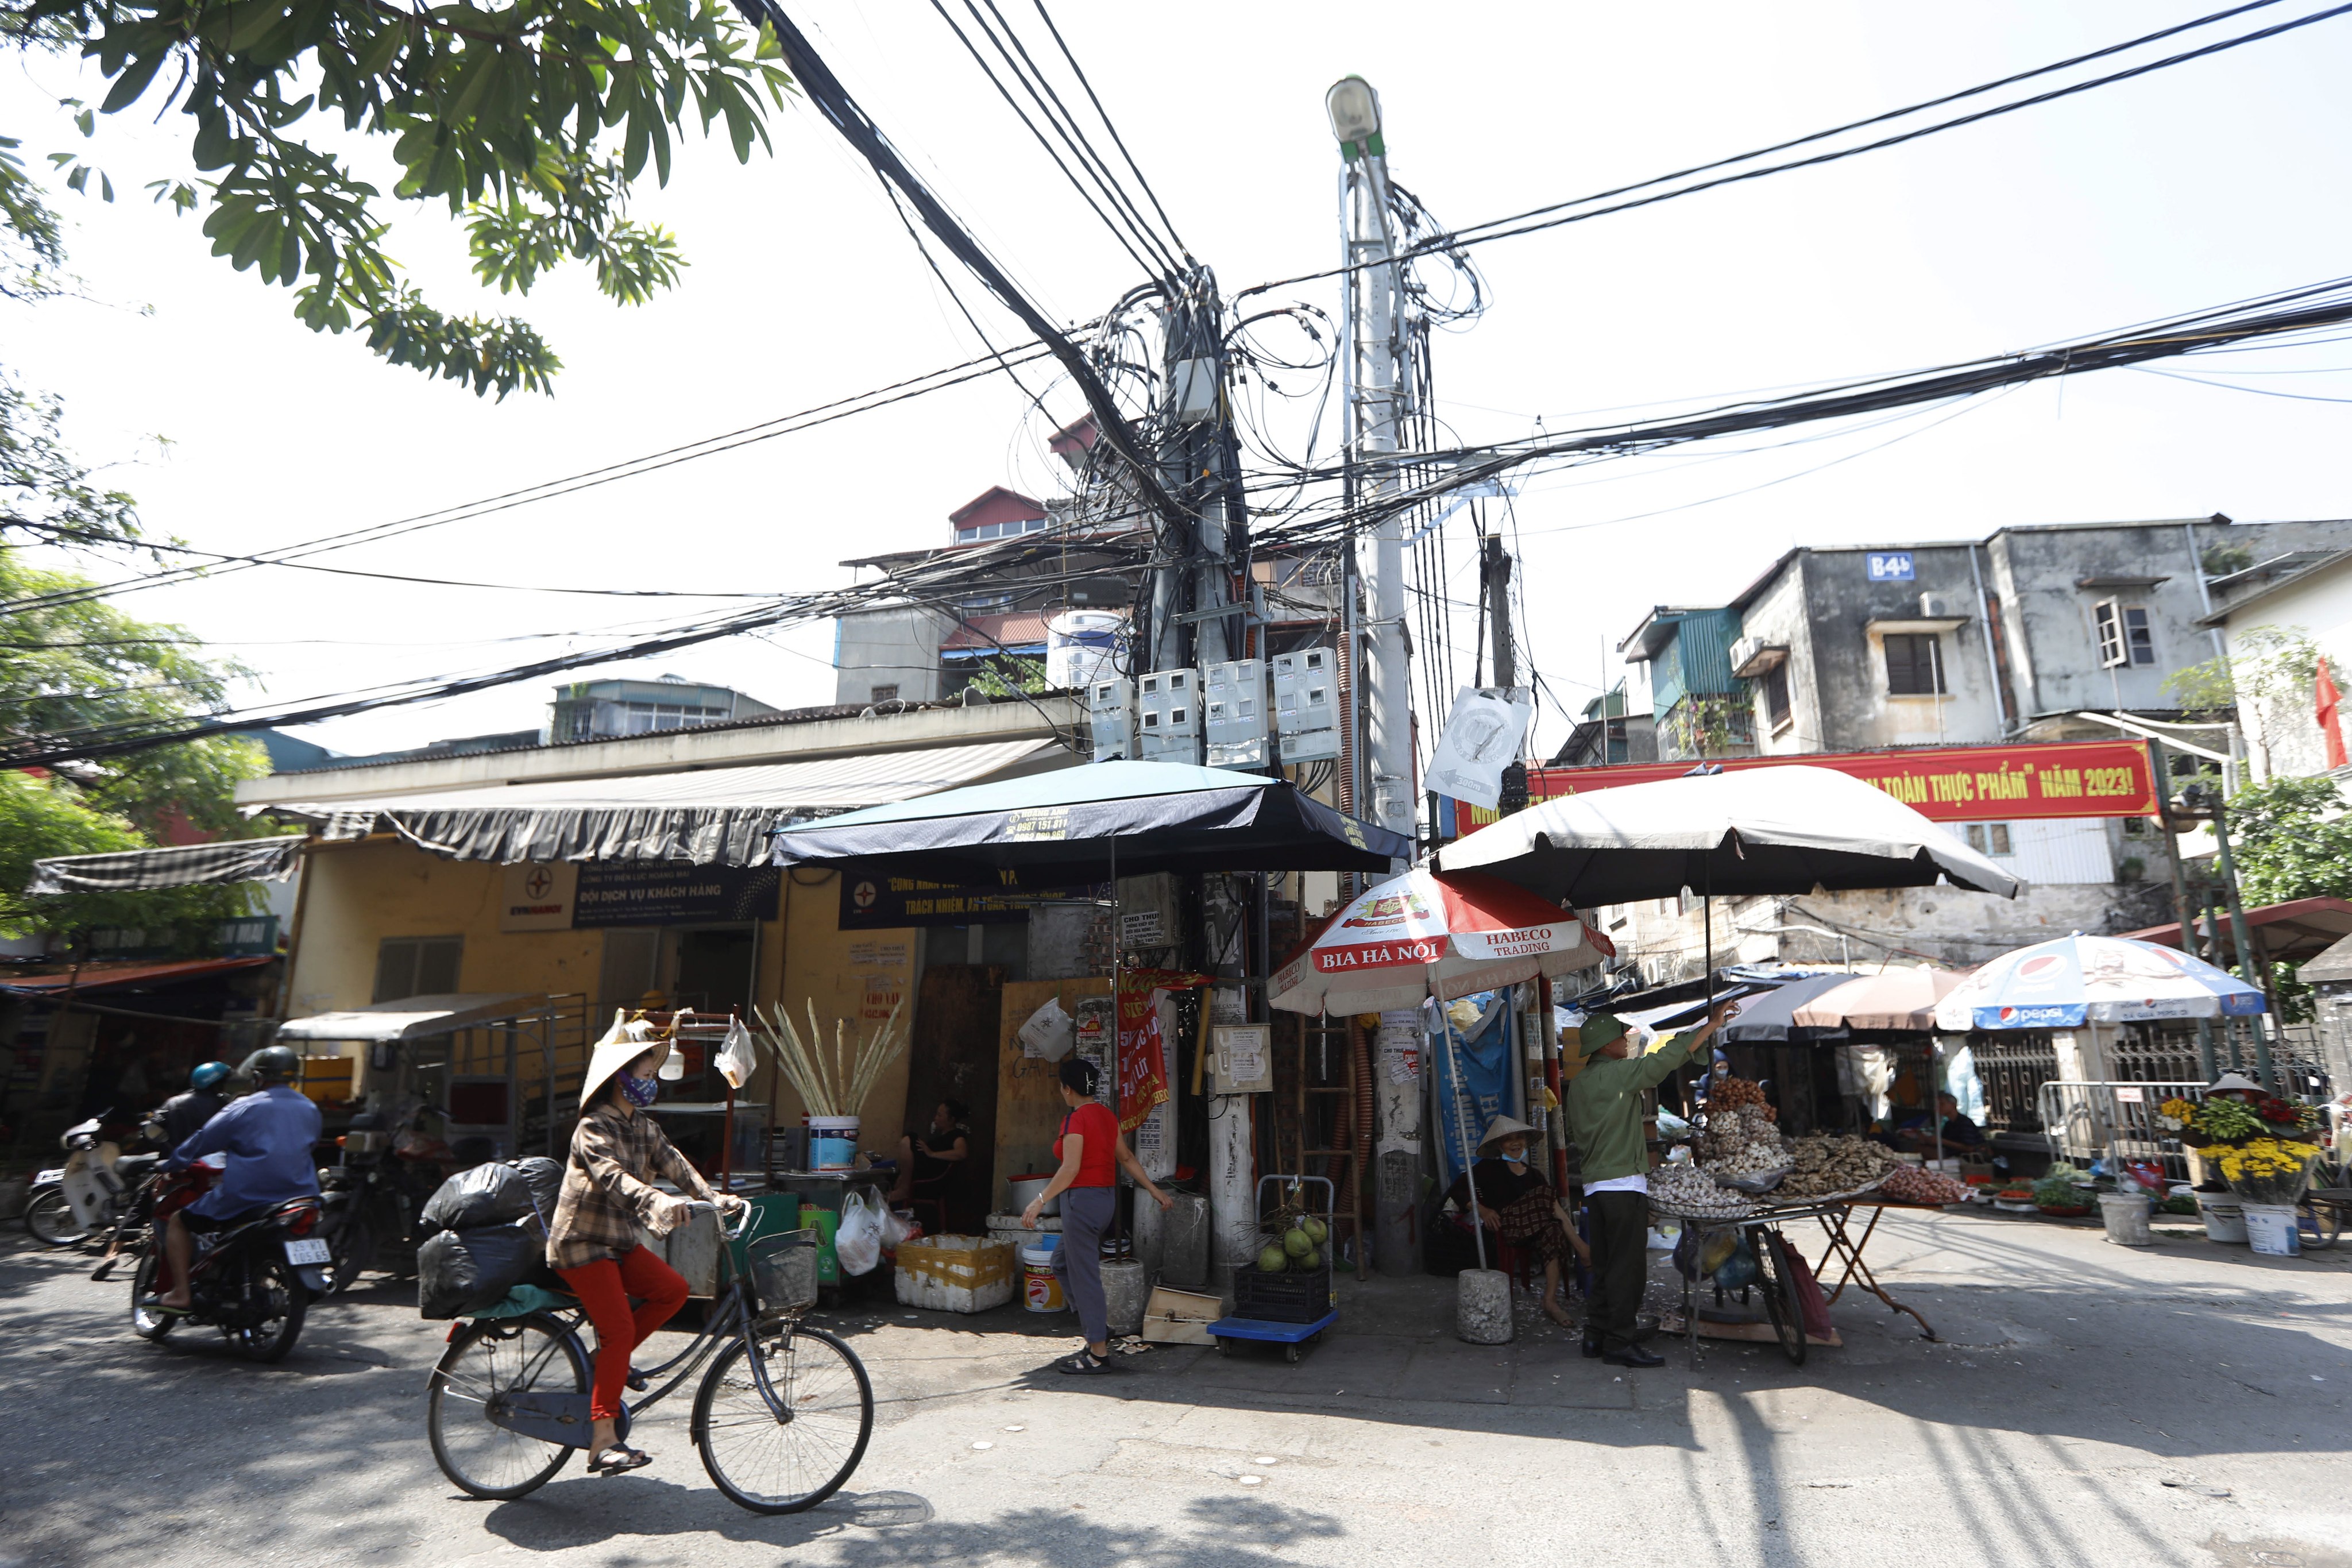 A woman rides a bicycle past utility poles with power cables in a street in Hanoi.  Photo: EPA-EFE